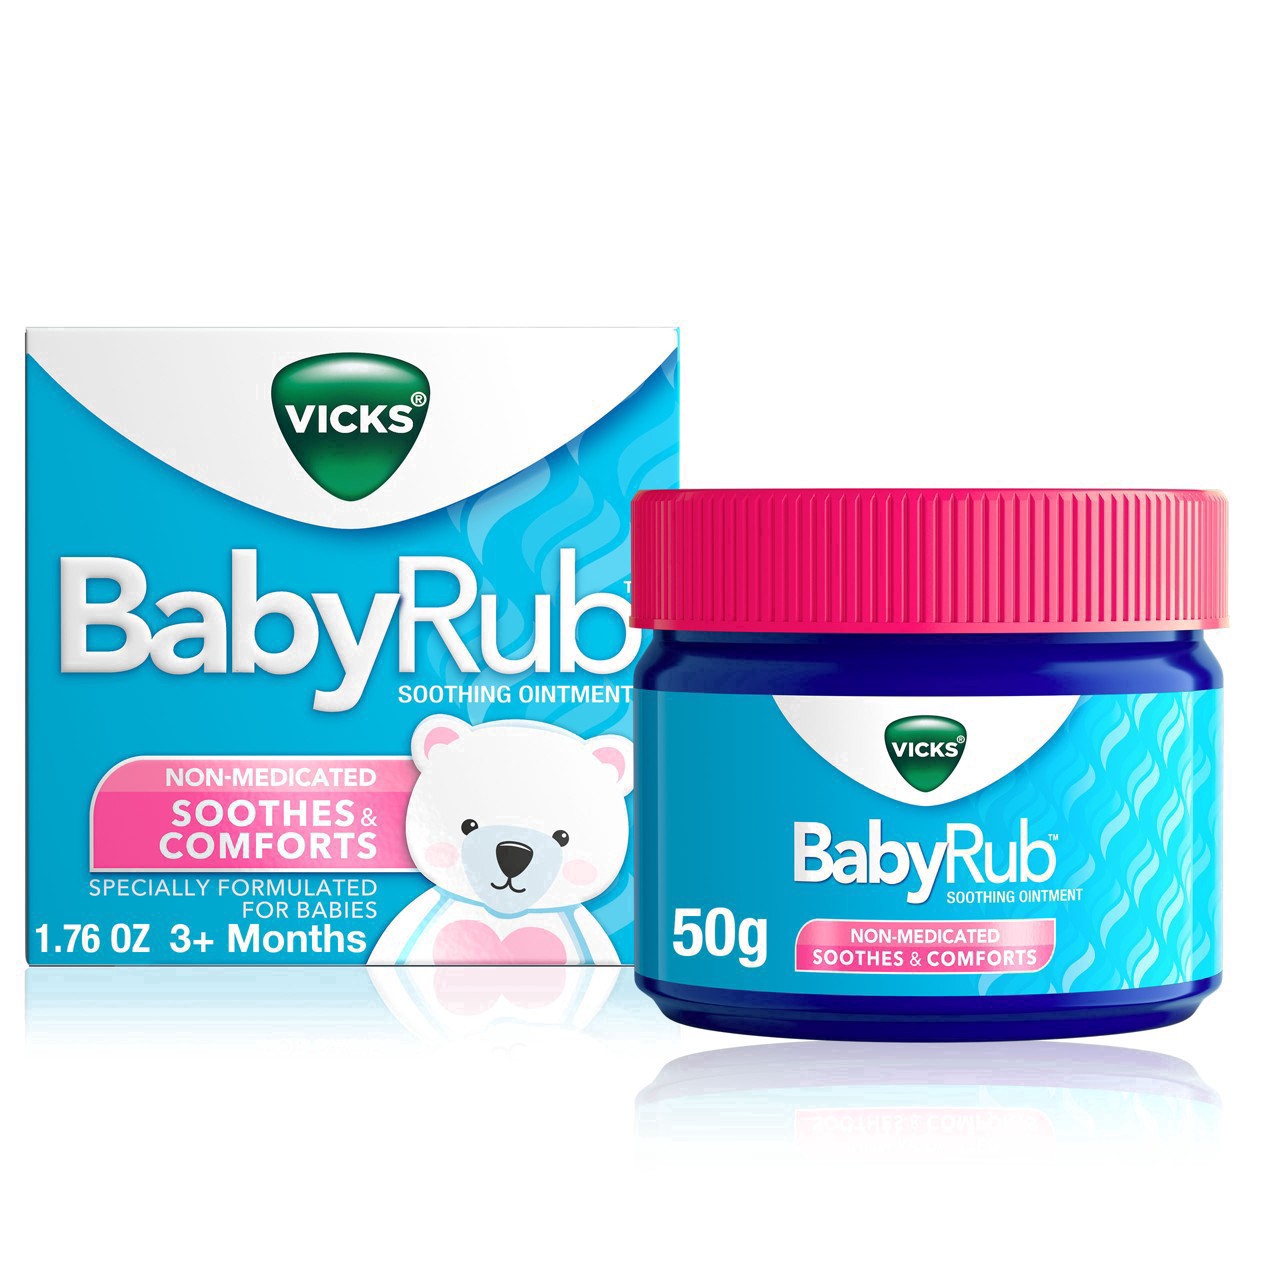 slide 15 of 78, Vicks BabyRub, Chest Rub Ointment with Soothing Aloe, Eucalyptus, Lavender, and Rosemary, from The Makers of VapoRub, 1.76 oz, 1.76 oz